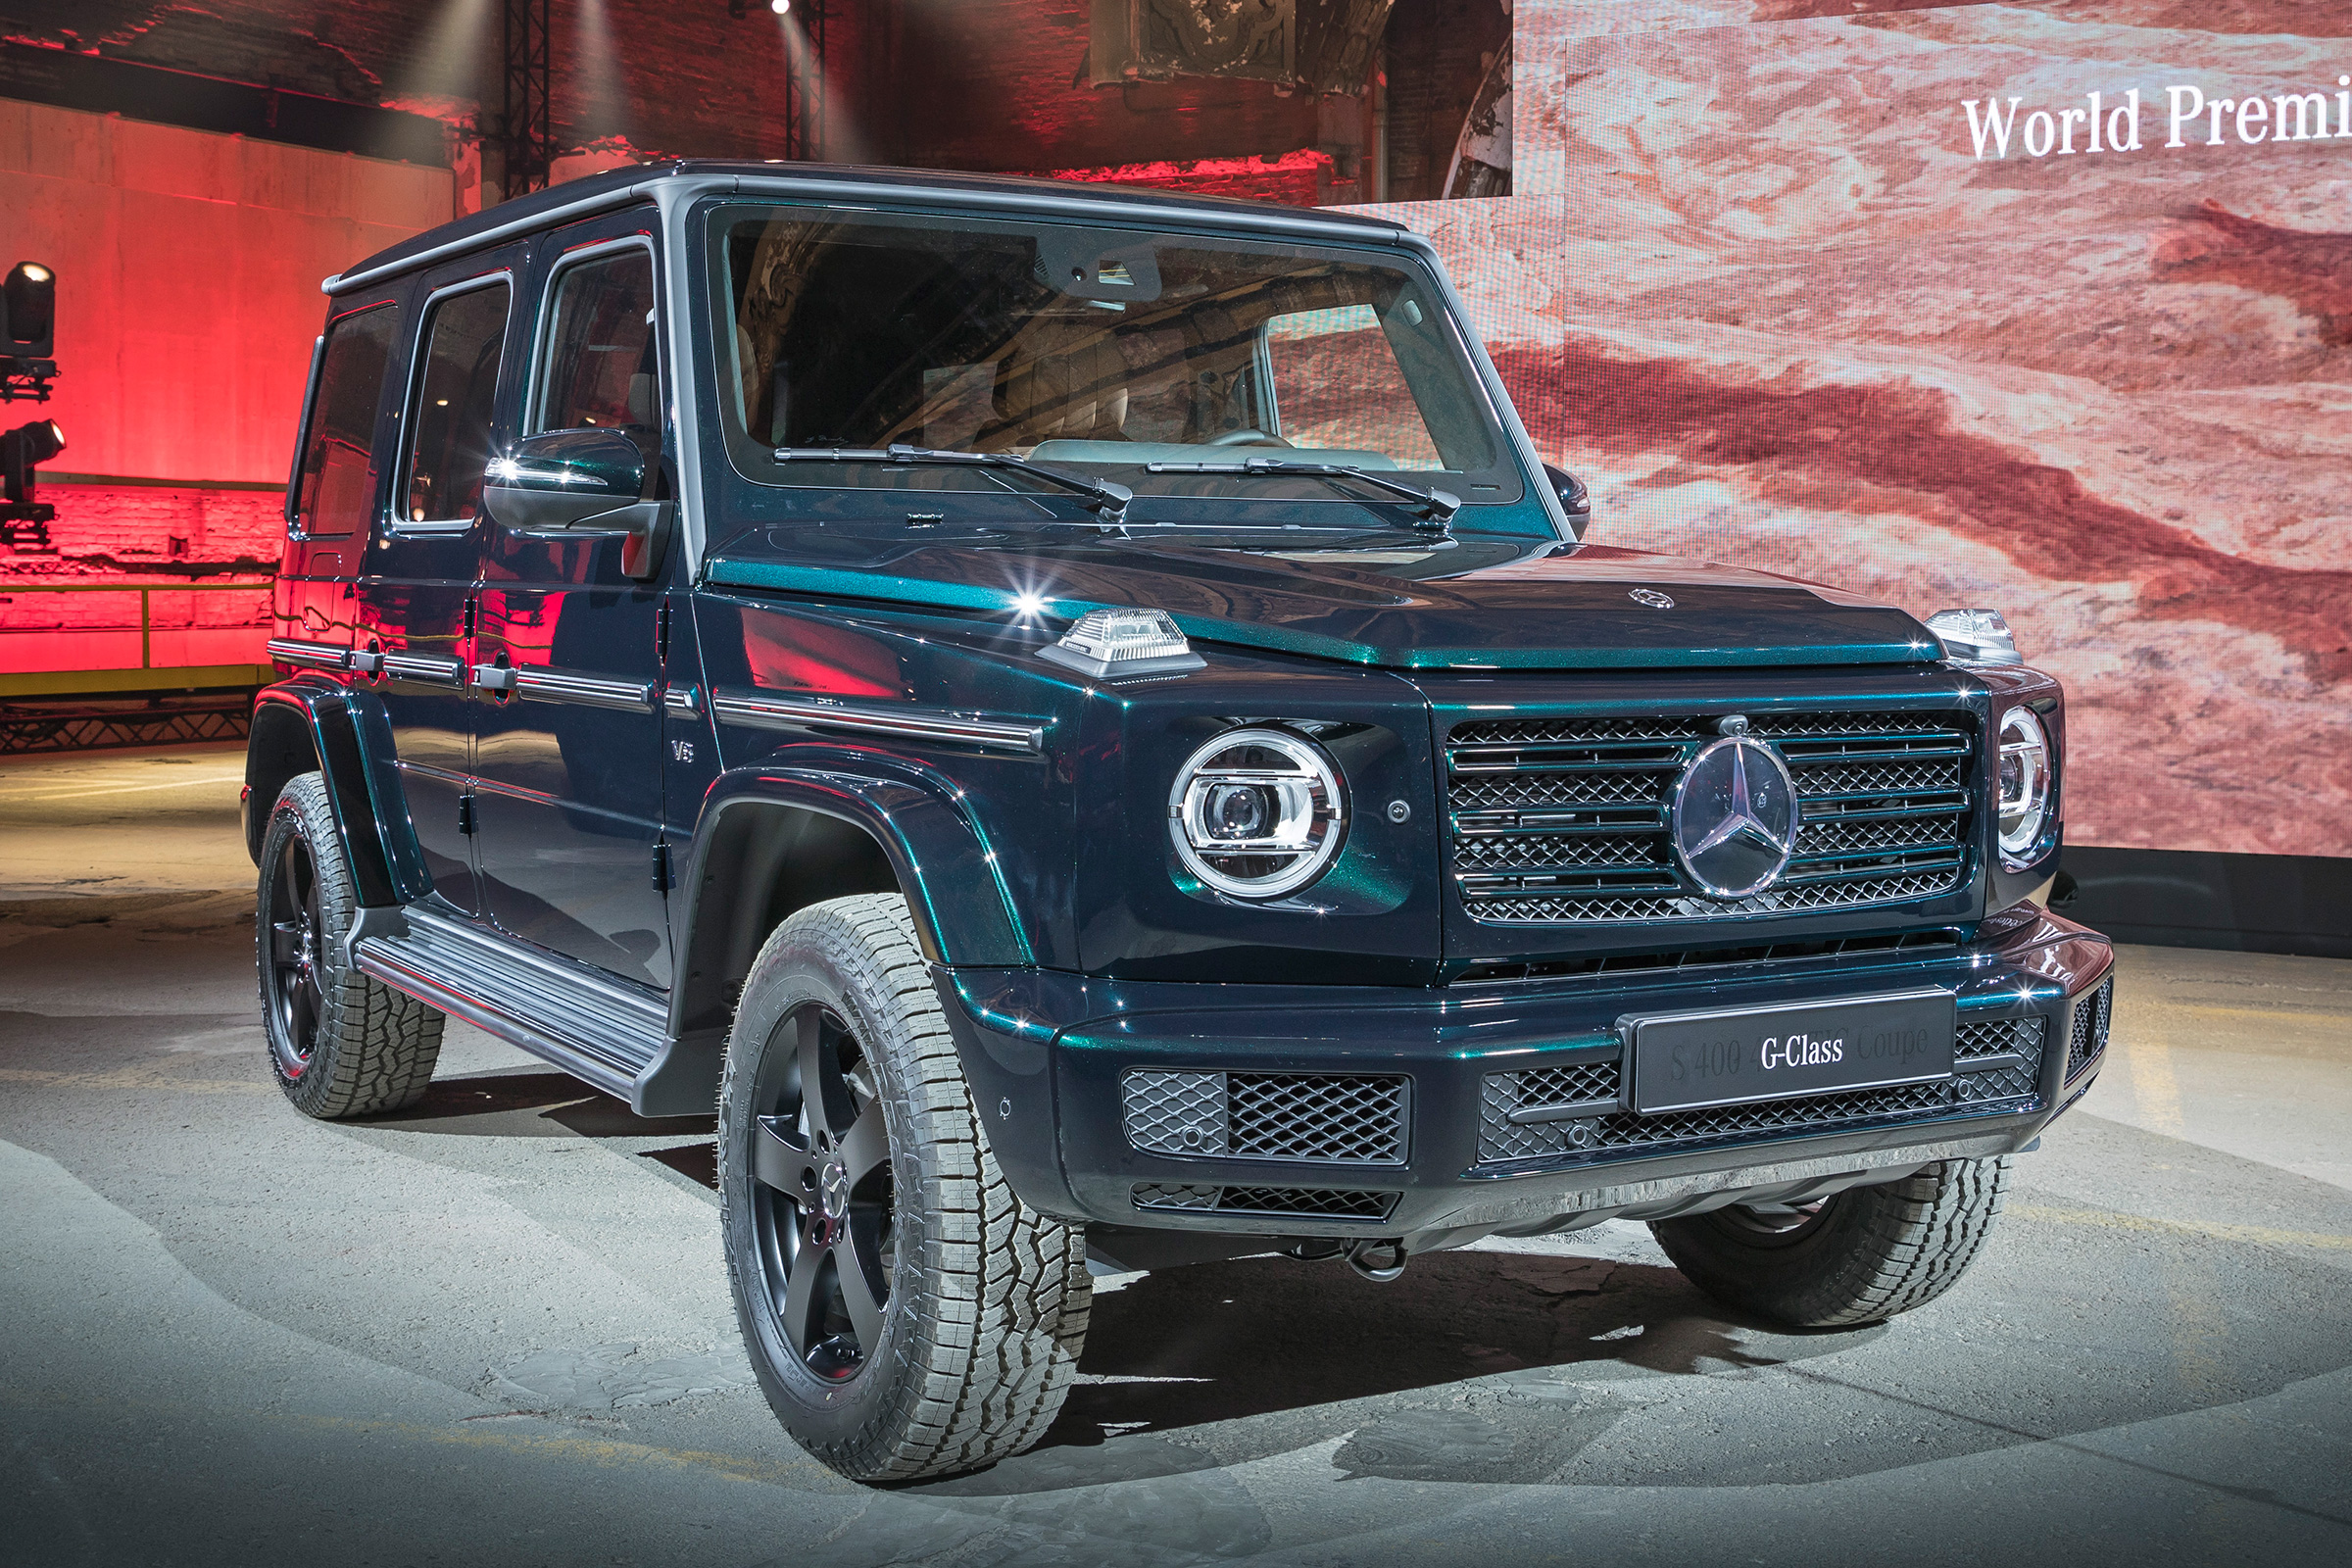 New 2018 Mercedes G-Class: SUV revealed with mix of old 